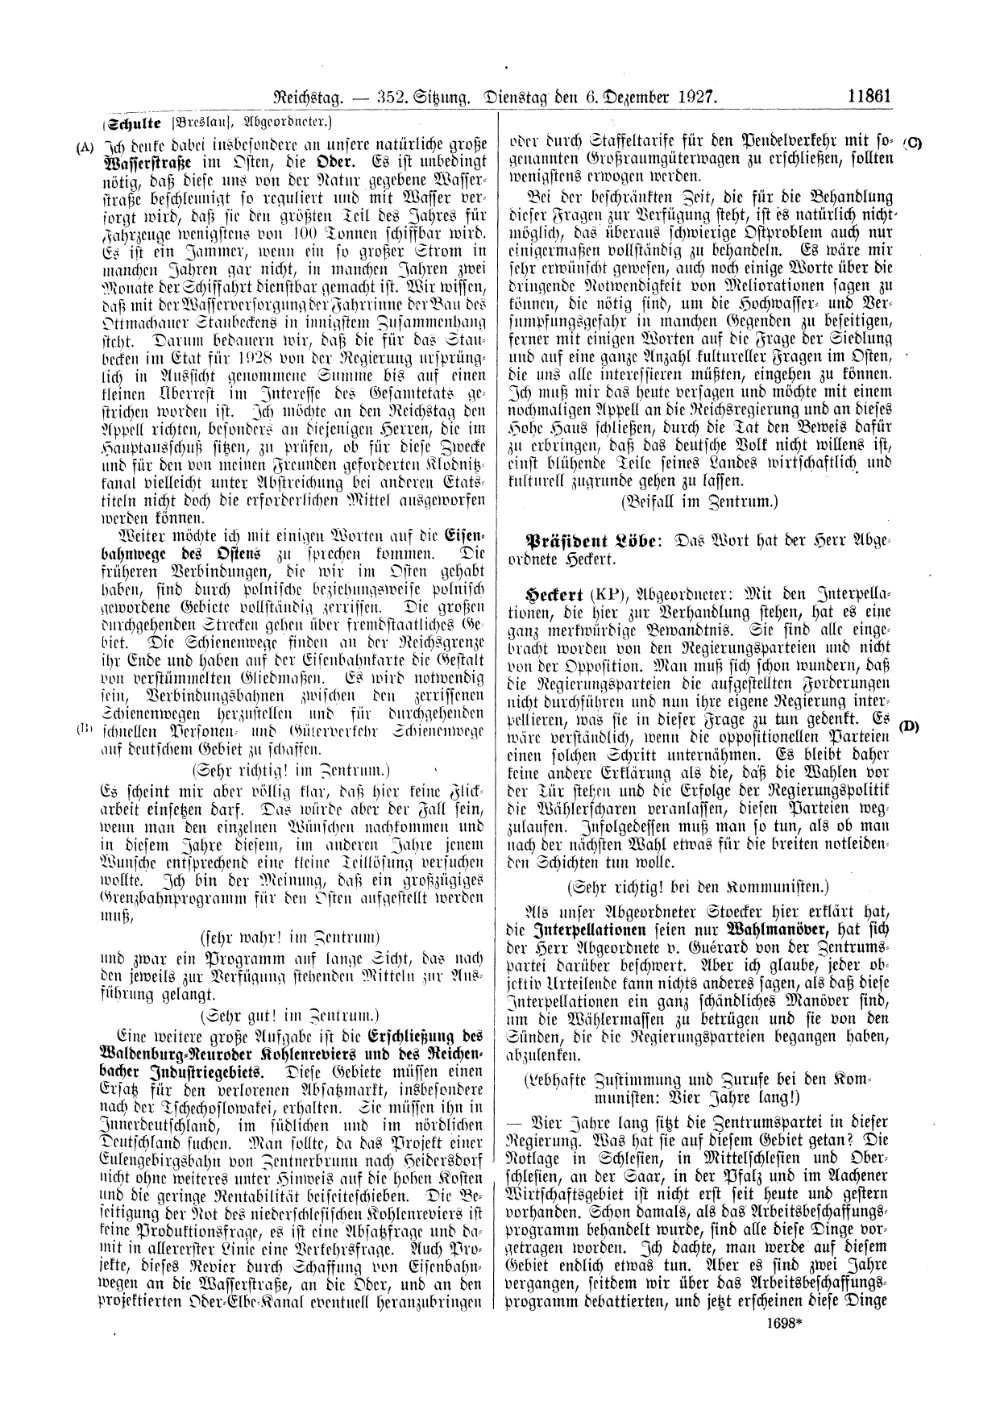 Scan of page 11861